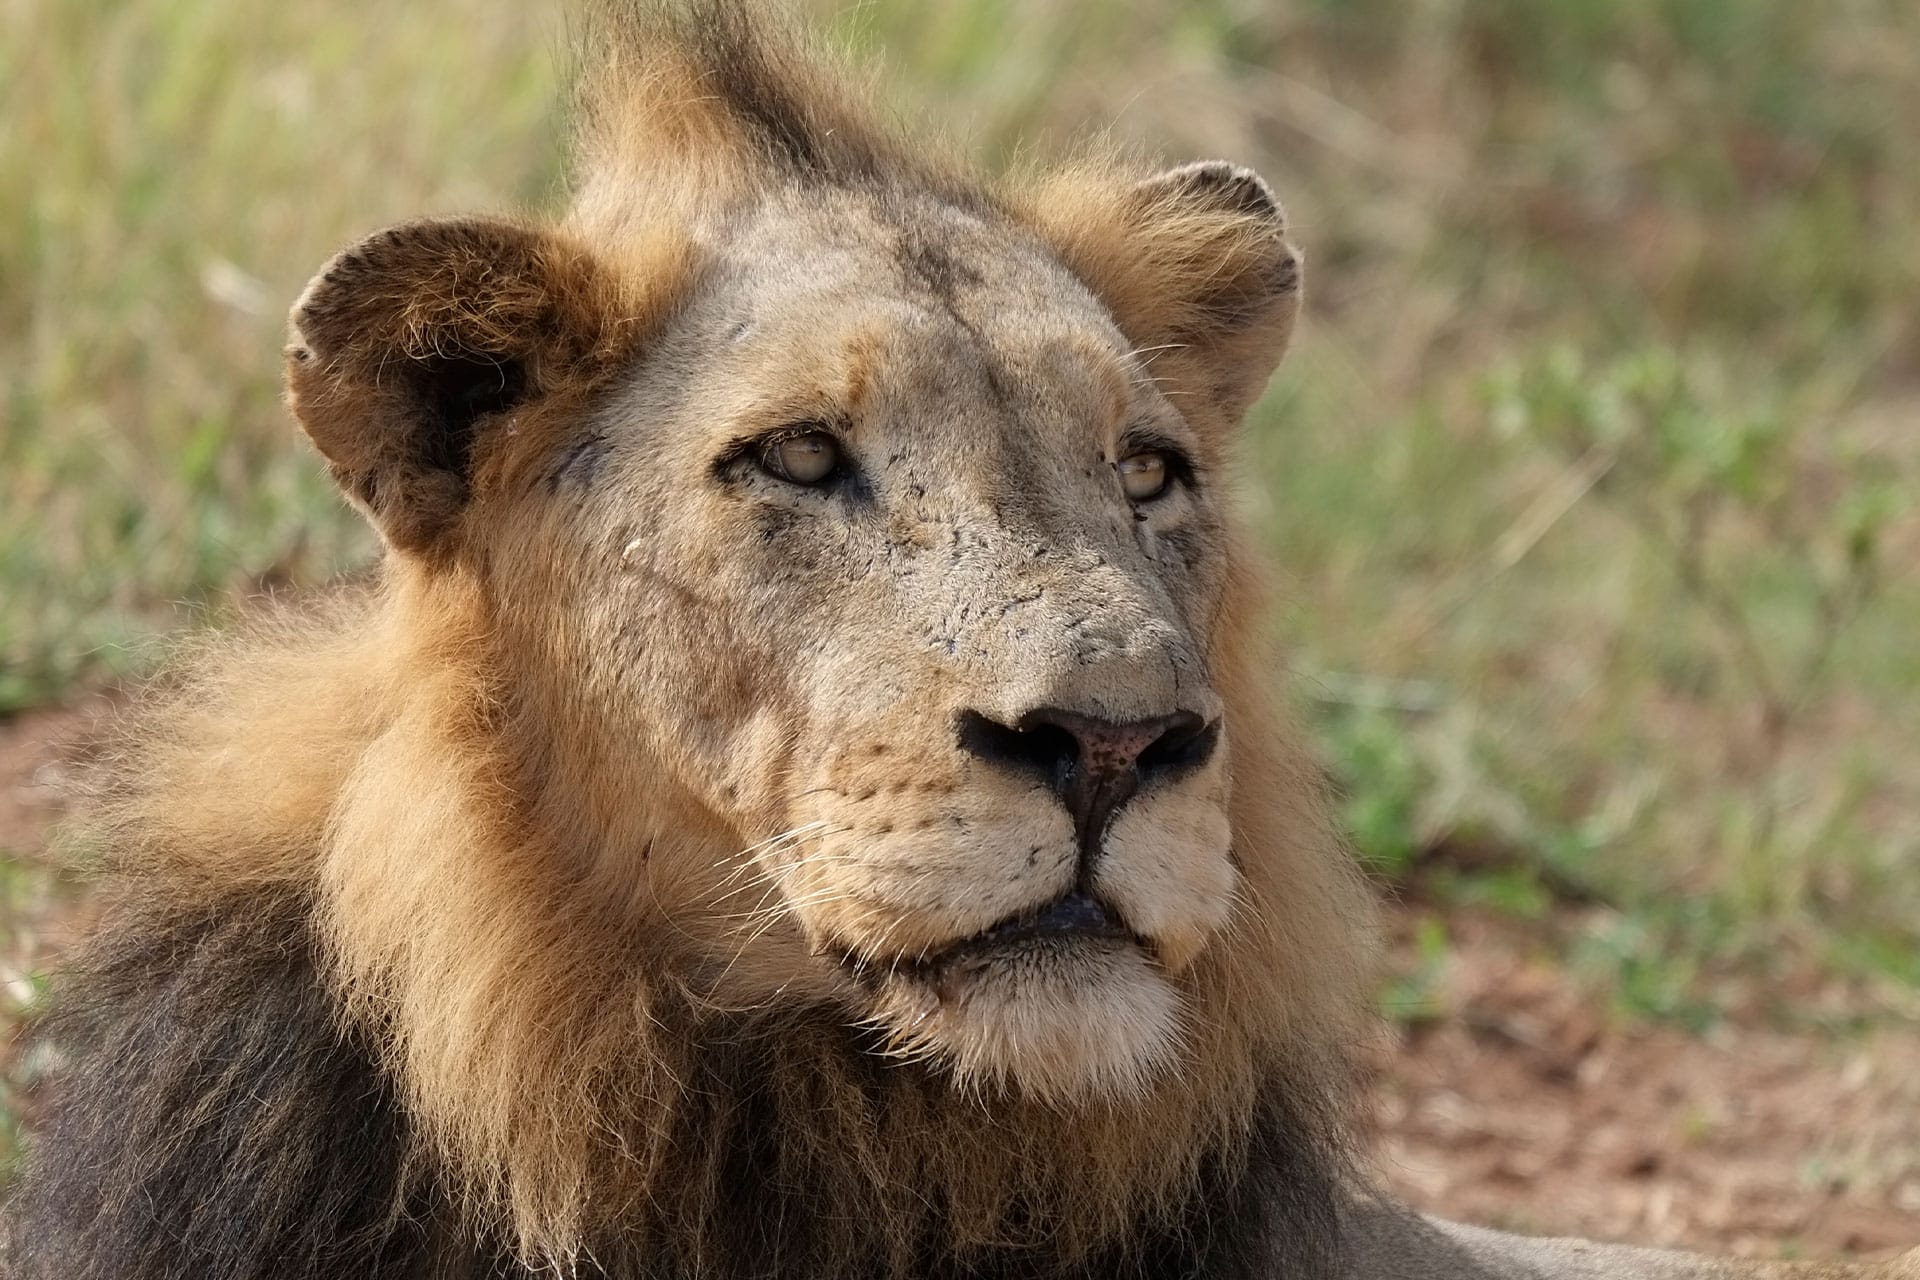 A lion at Thornybush, South Africa.